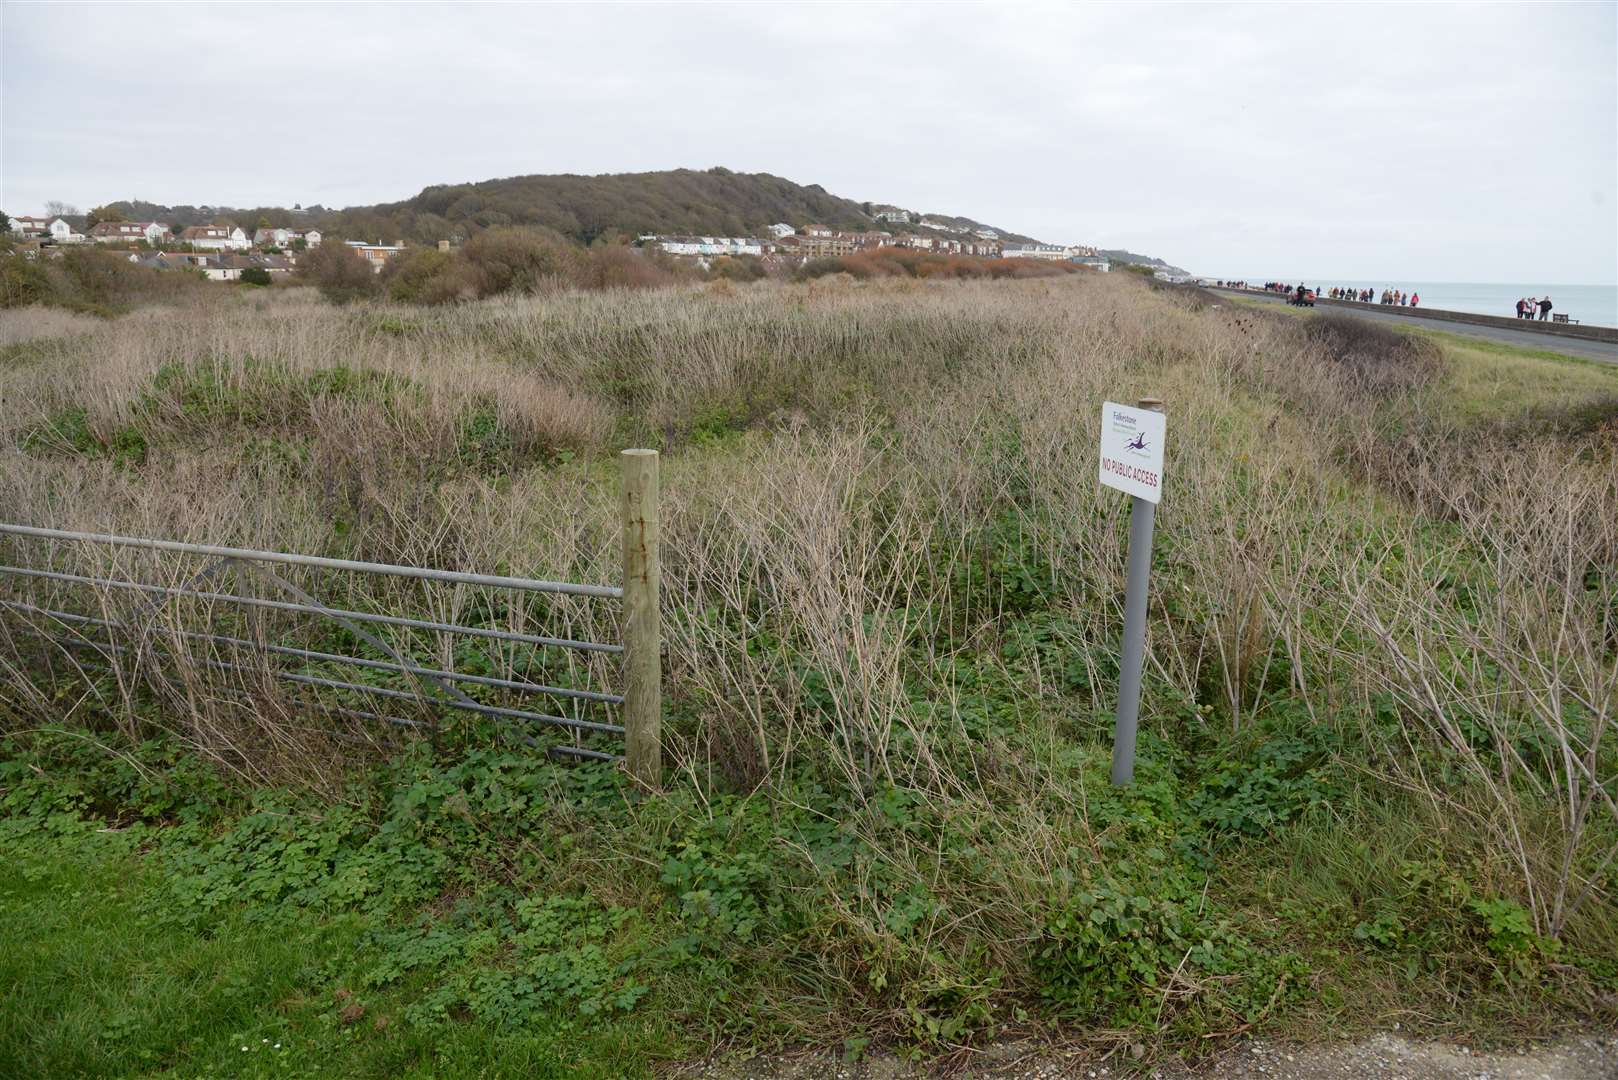 150 homes and a hotel are also proposed for the land. Picture: Chris Davey